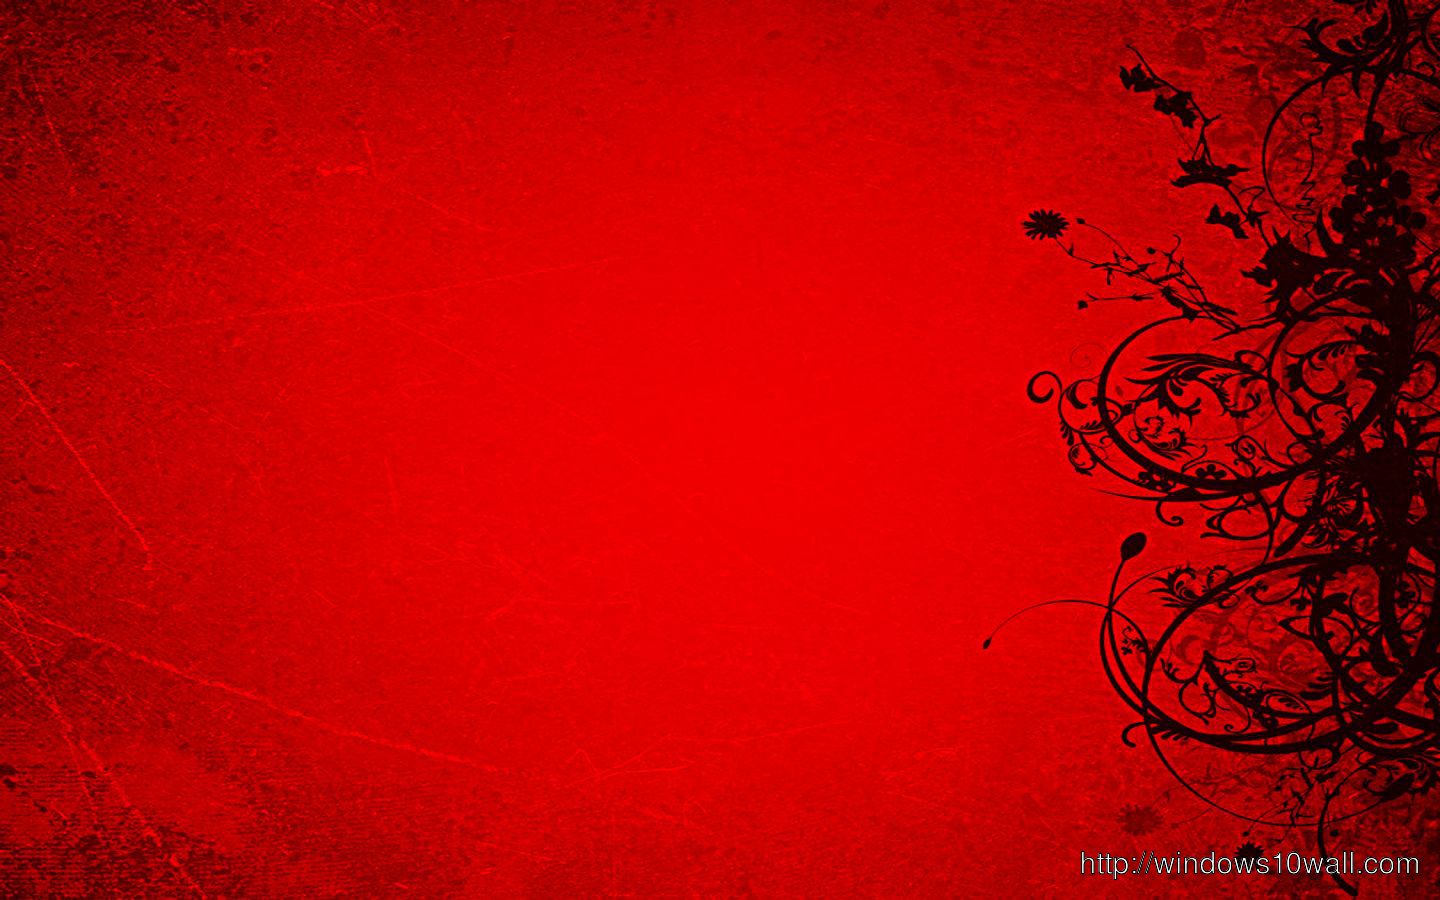 Red Flare Background Free Hd Wallpaper Windows 10 Wallpapers